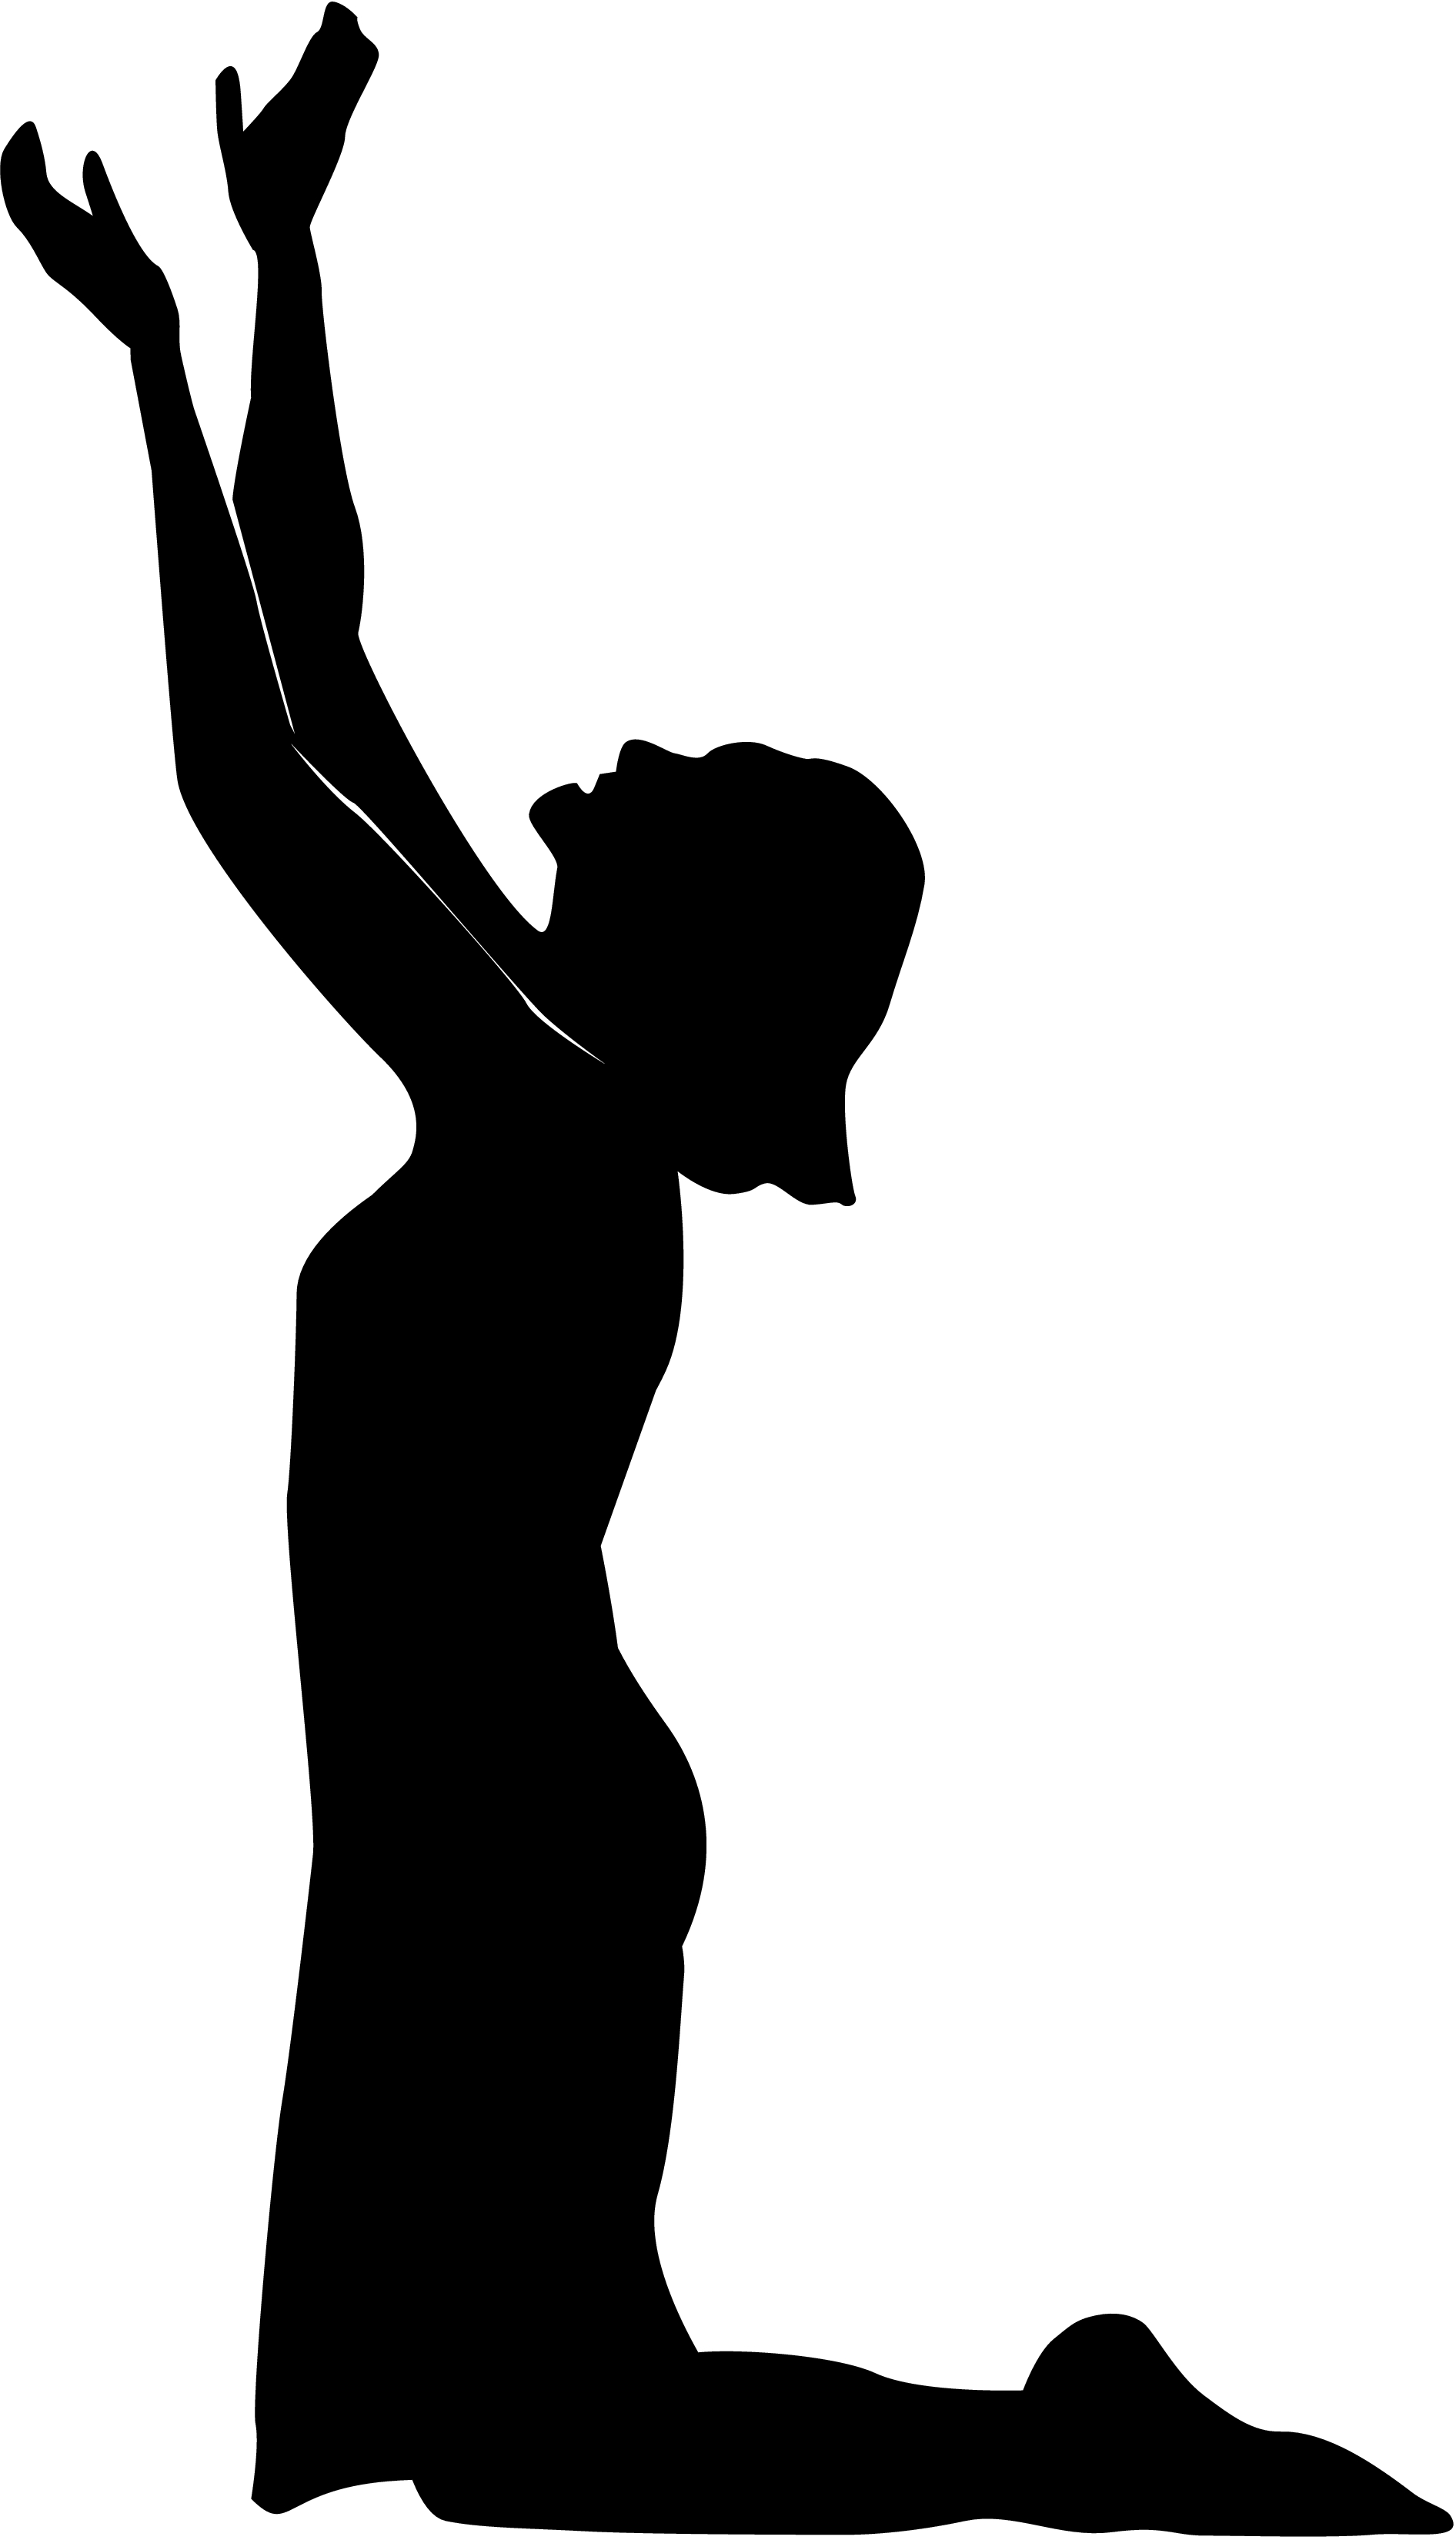 Praying hands silhouette clipart 2